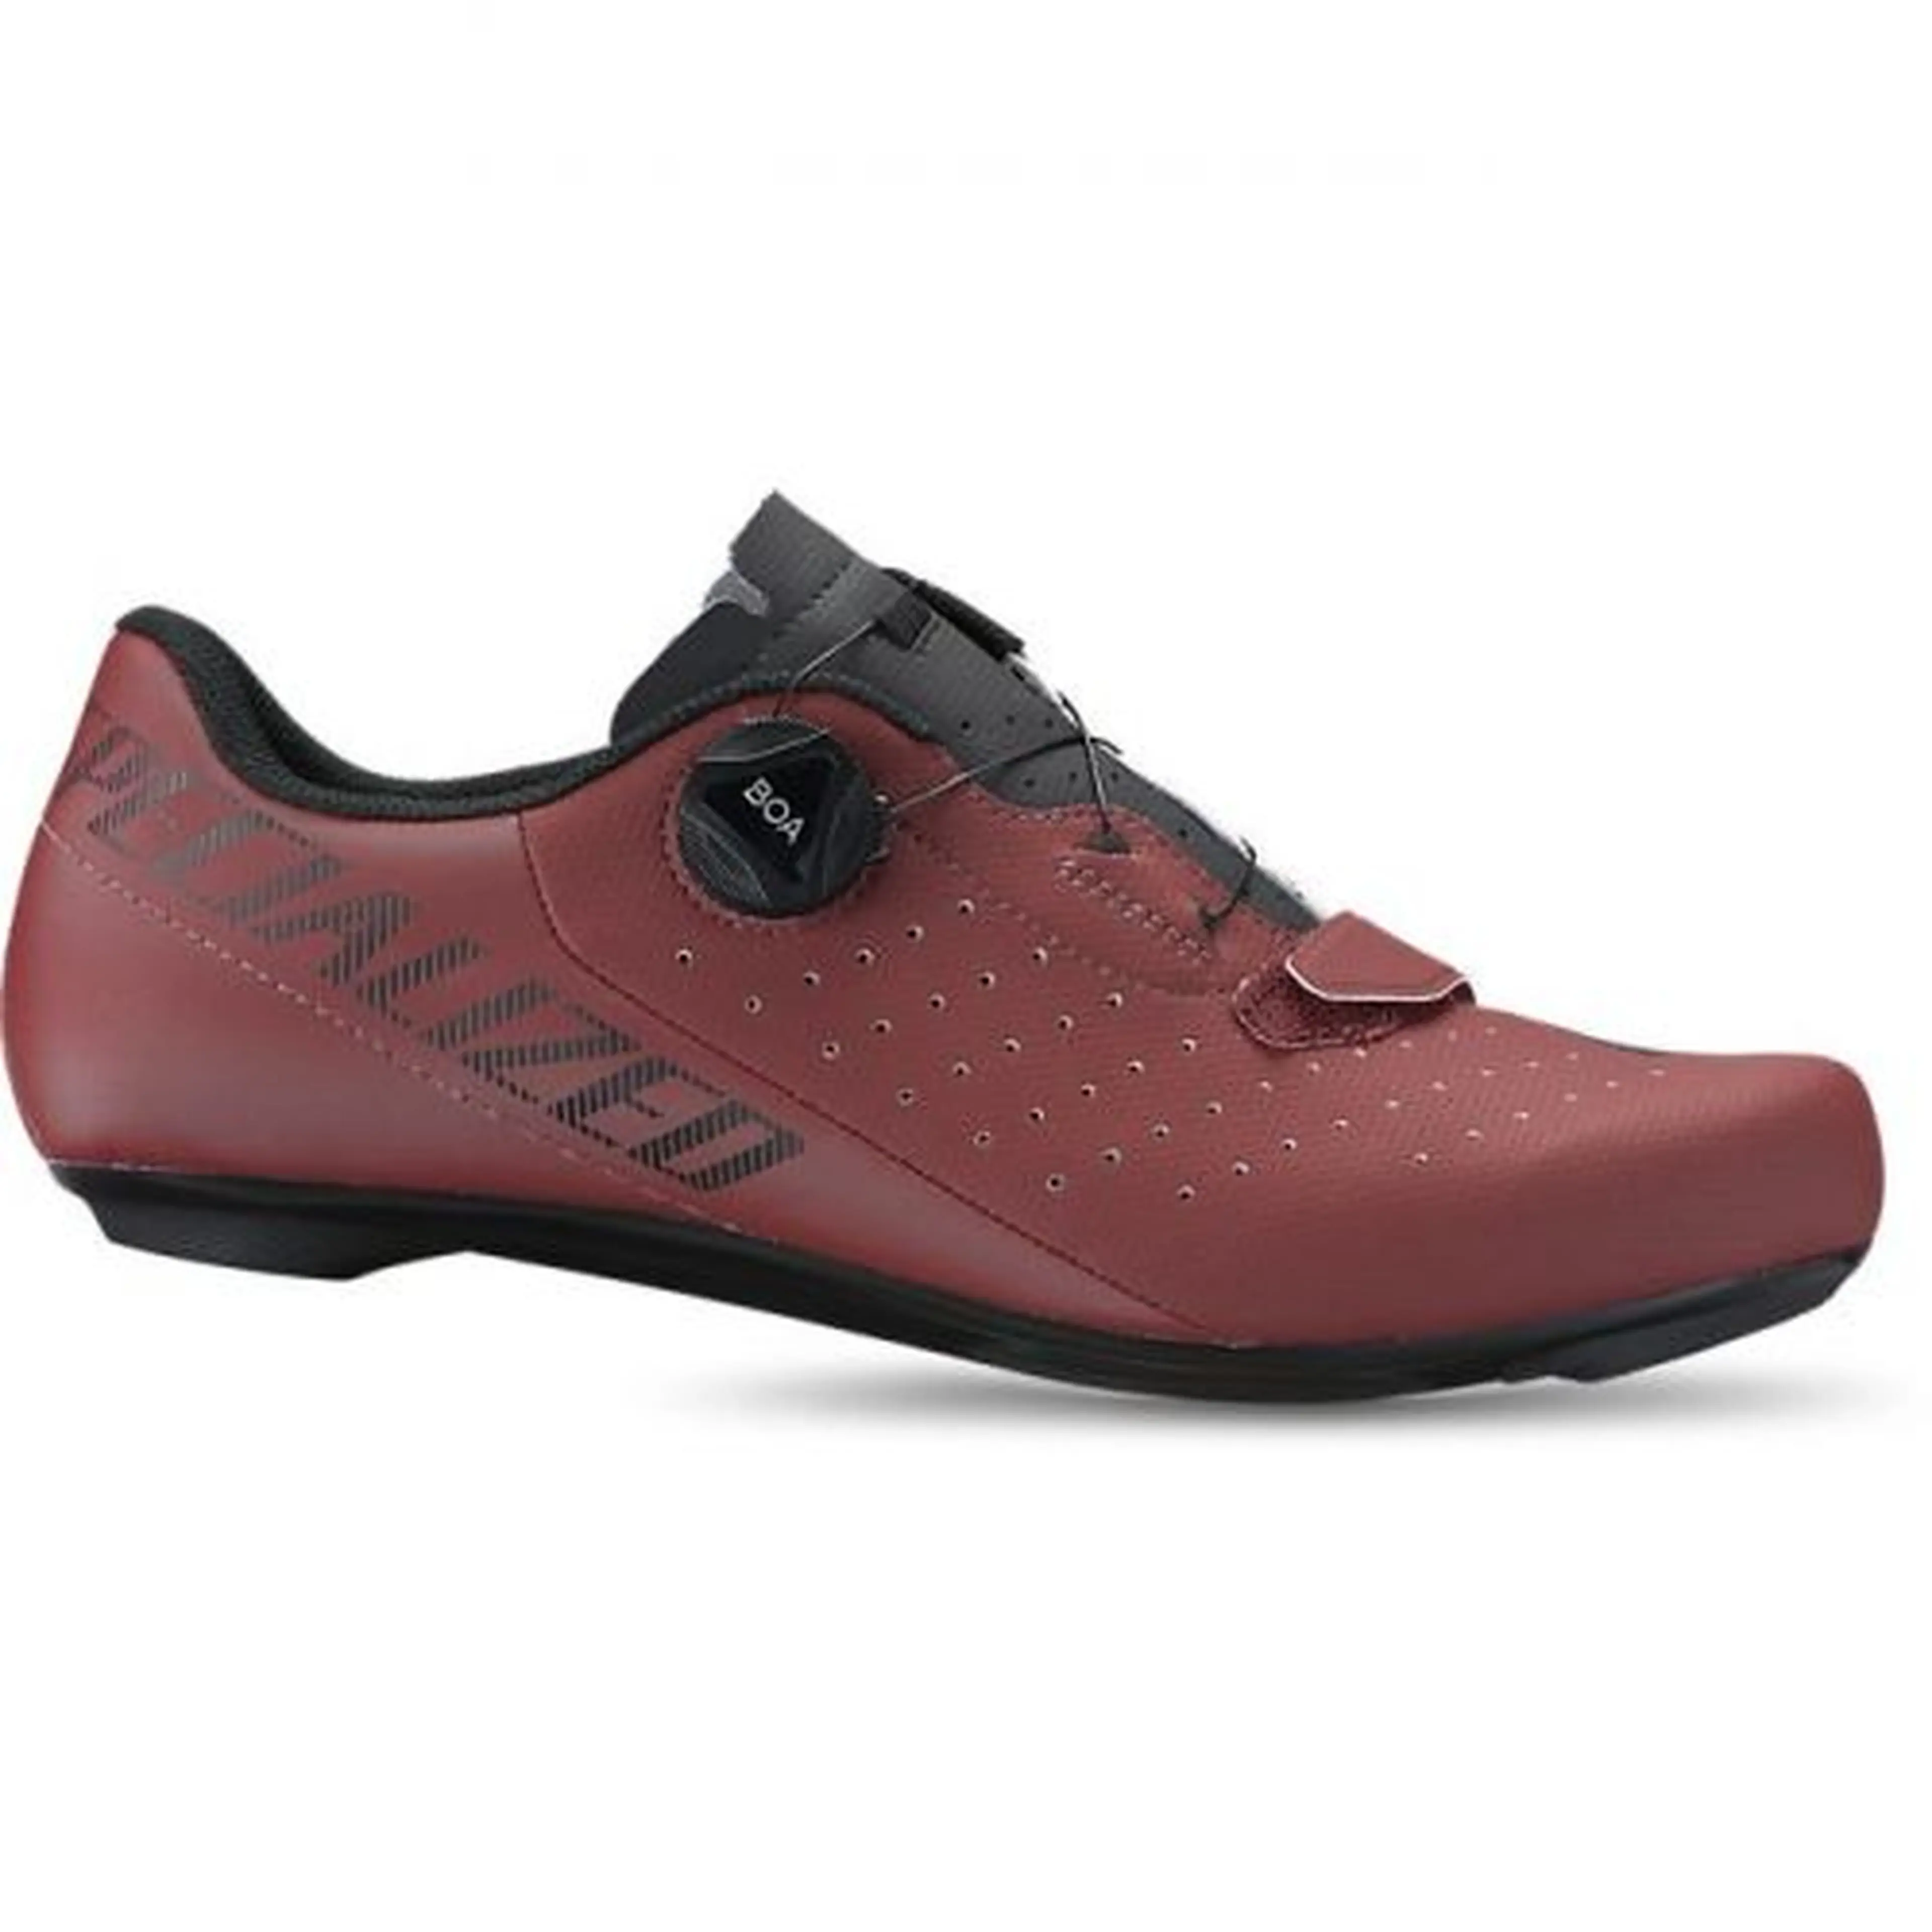 1. Pantofi SPECIALIZED Torch 1.0 Road - Maroon/Black